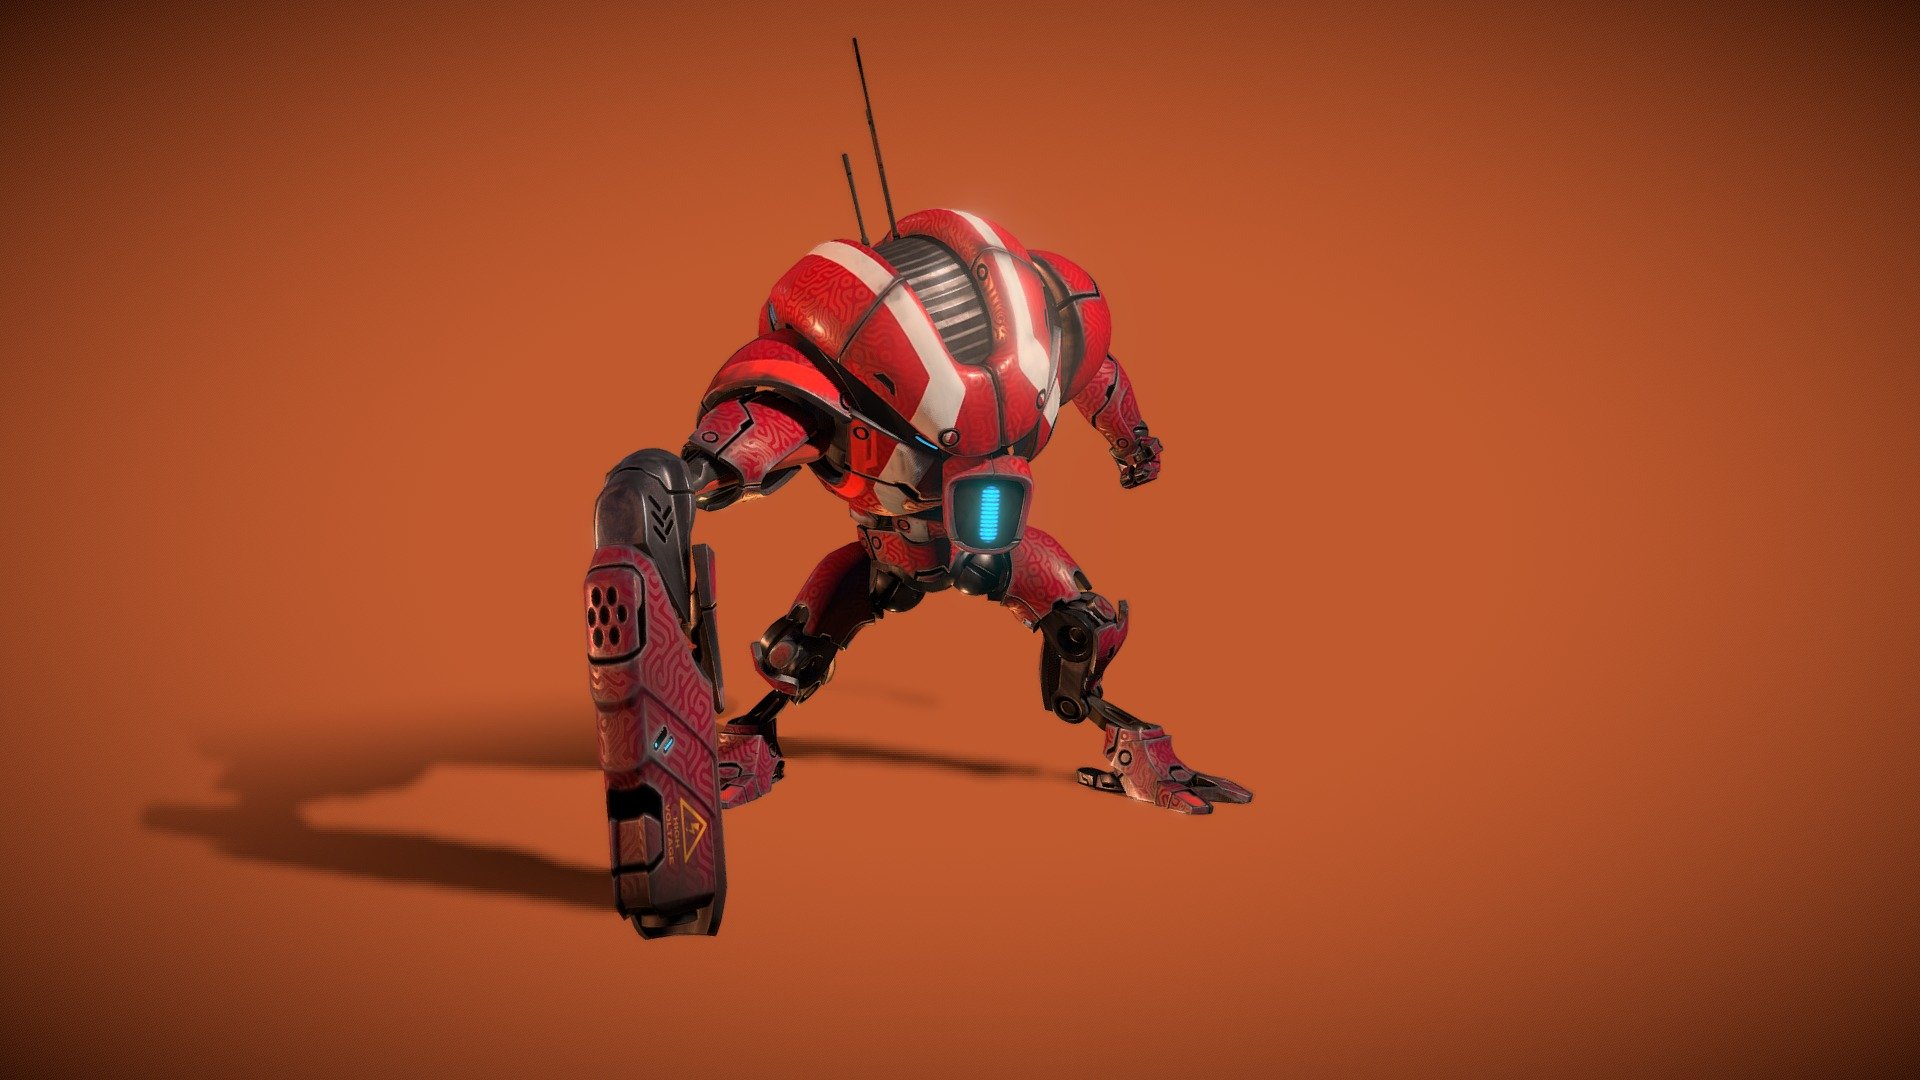 You'll get 4 skins, PBR/handpainted maps done in 3D-Coat (Basic/Watcher/Protector/Solarus), FBX with &amp; without skeleton, + an Akeytsu file ready to animate with the fully rigged character. Get the software here : https://www.nukeygara.com/try ;)

The model is realtime ready so you can export it anywhere on realtime engines like UnrealEngine4/Unity/Marmoset. NormalMaps are Y- baked in MIKK TangentSpace, model use custom VerticesNormals so keep them at import ;)

Textures were made on 3D-Coat using this pack : https://www.artstation.com/vexod14/store/Wmw1/3d-coat-38-stylized-pbr-smartmaterials

You can preview each skin variants here : https://www.artstation.com/artwork/aR33Kk

Cheers ! - Shocker 204 - Buy Royalty Free 3D model by Etienne Beschet (@etienne.beschet) 3d model